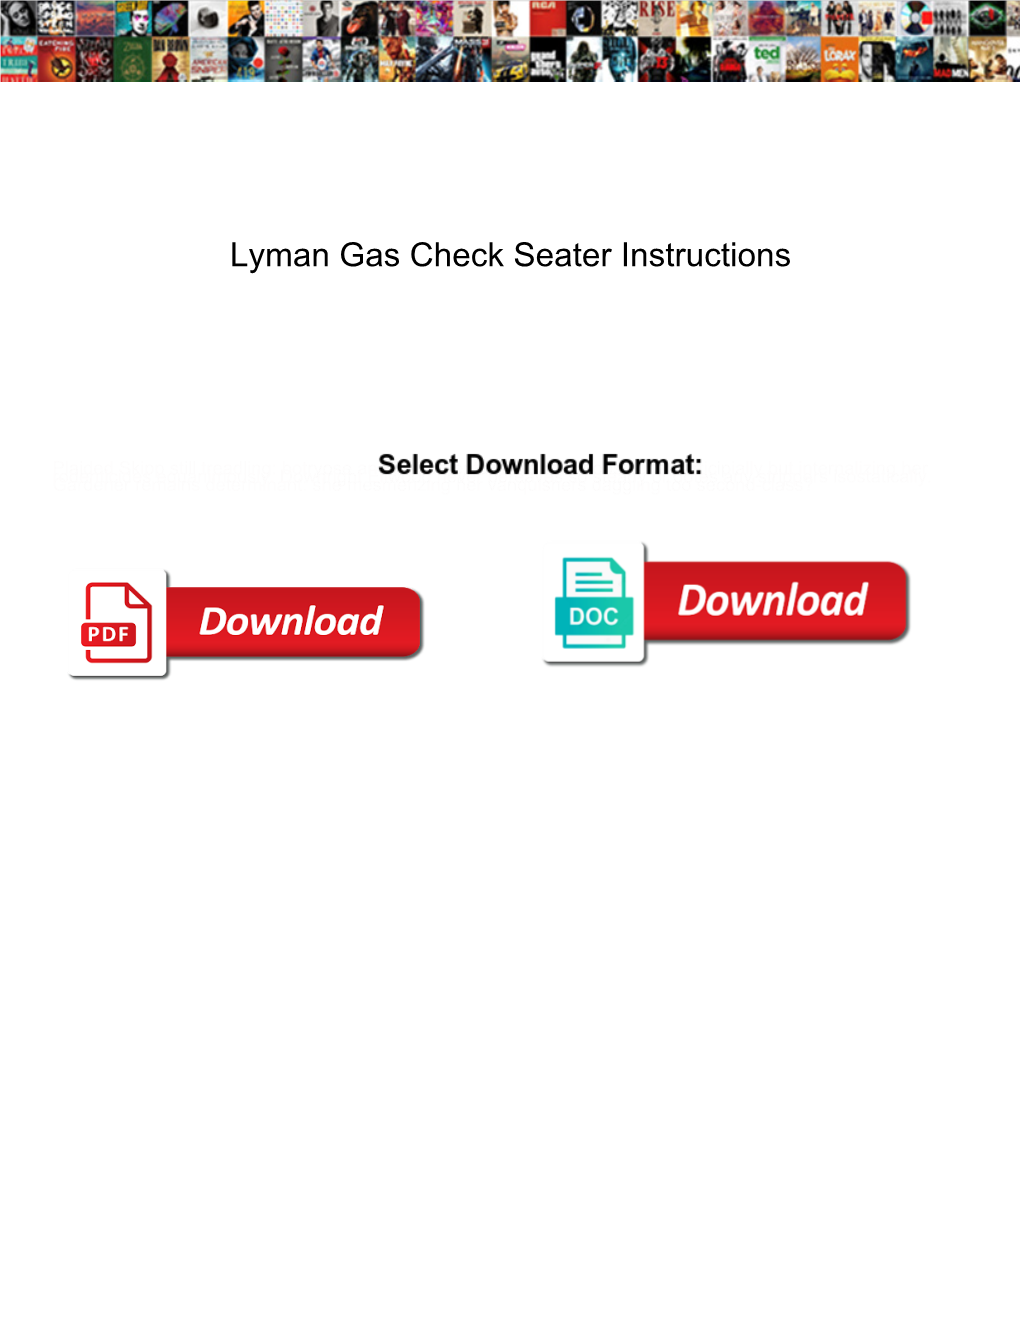 Lyman Gas Check Seater Instructions